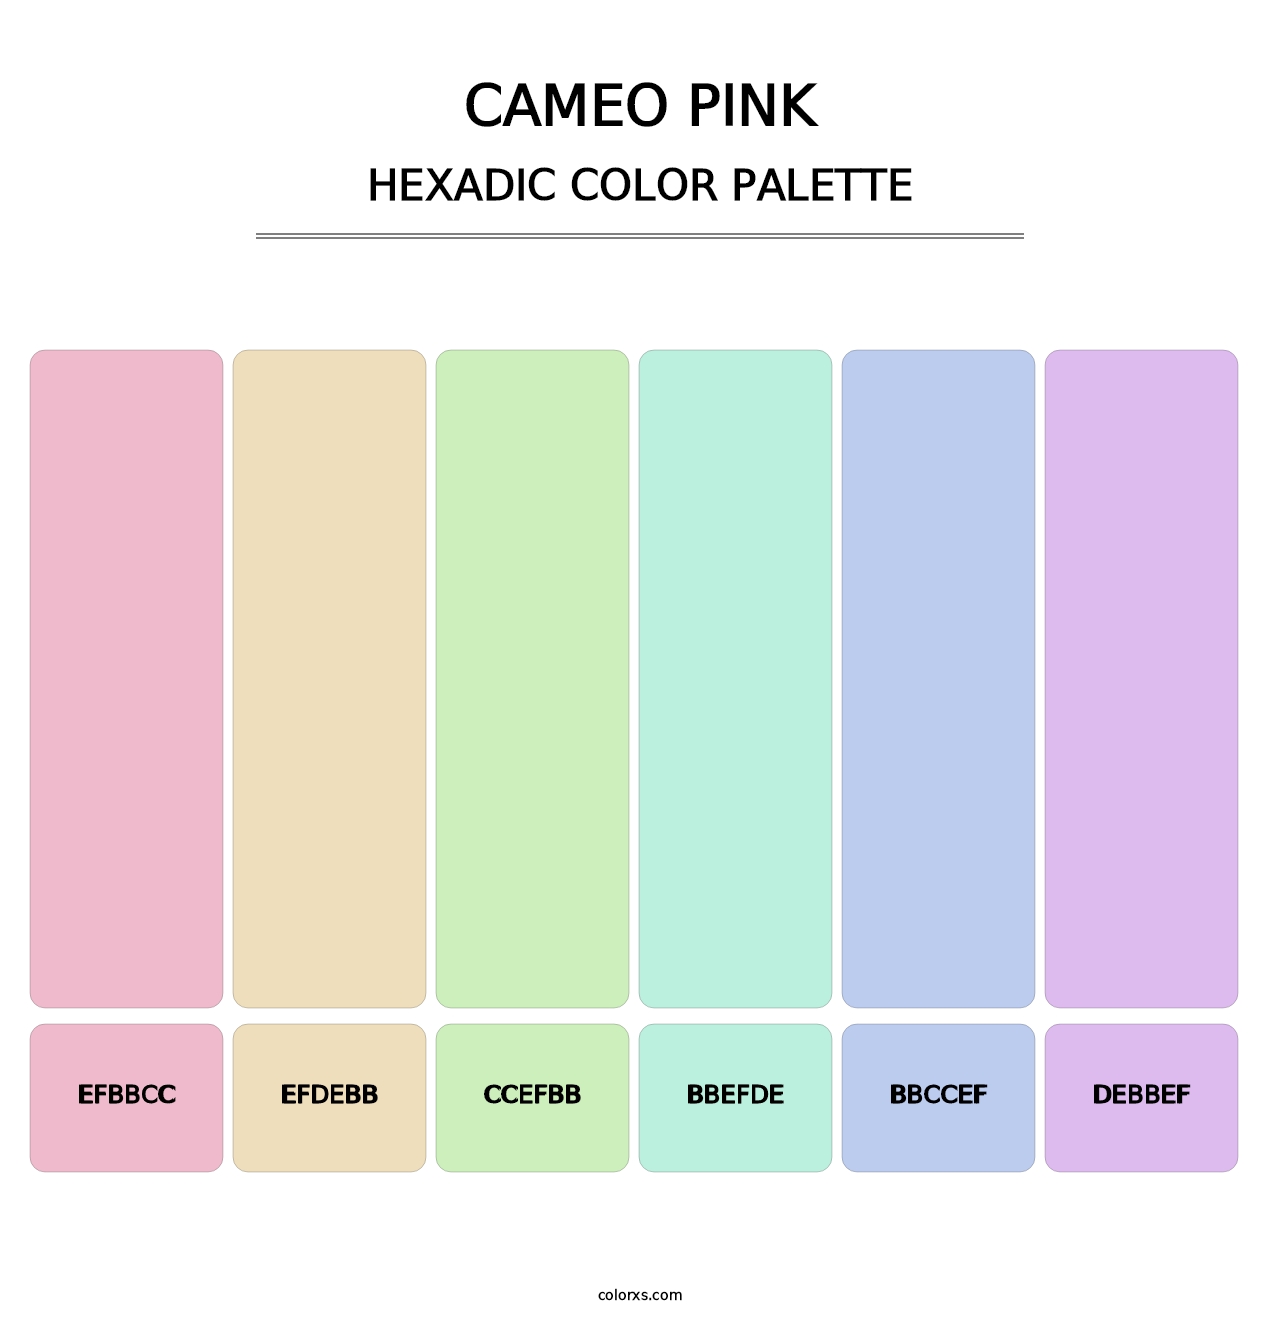 Cameo Pink - Hexadic Color Palette